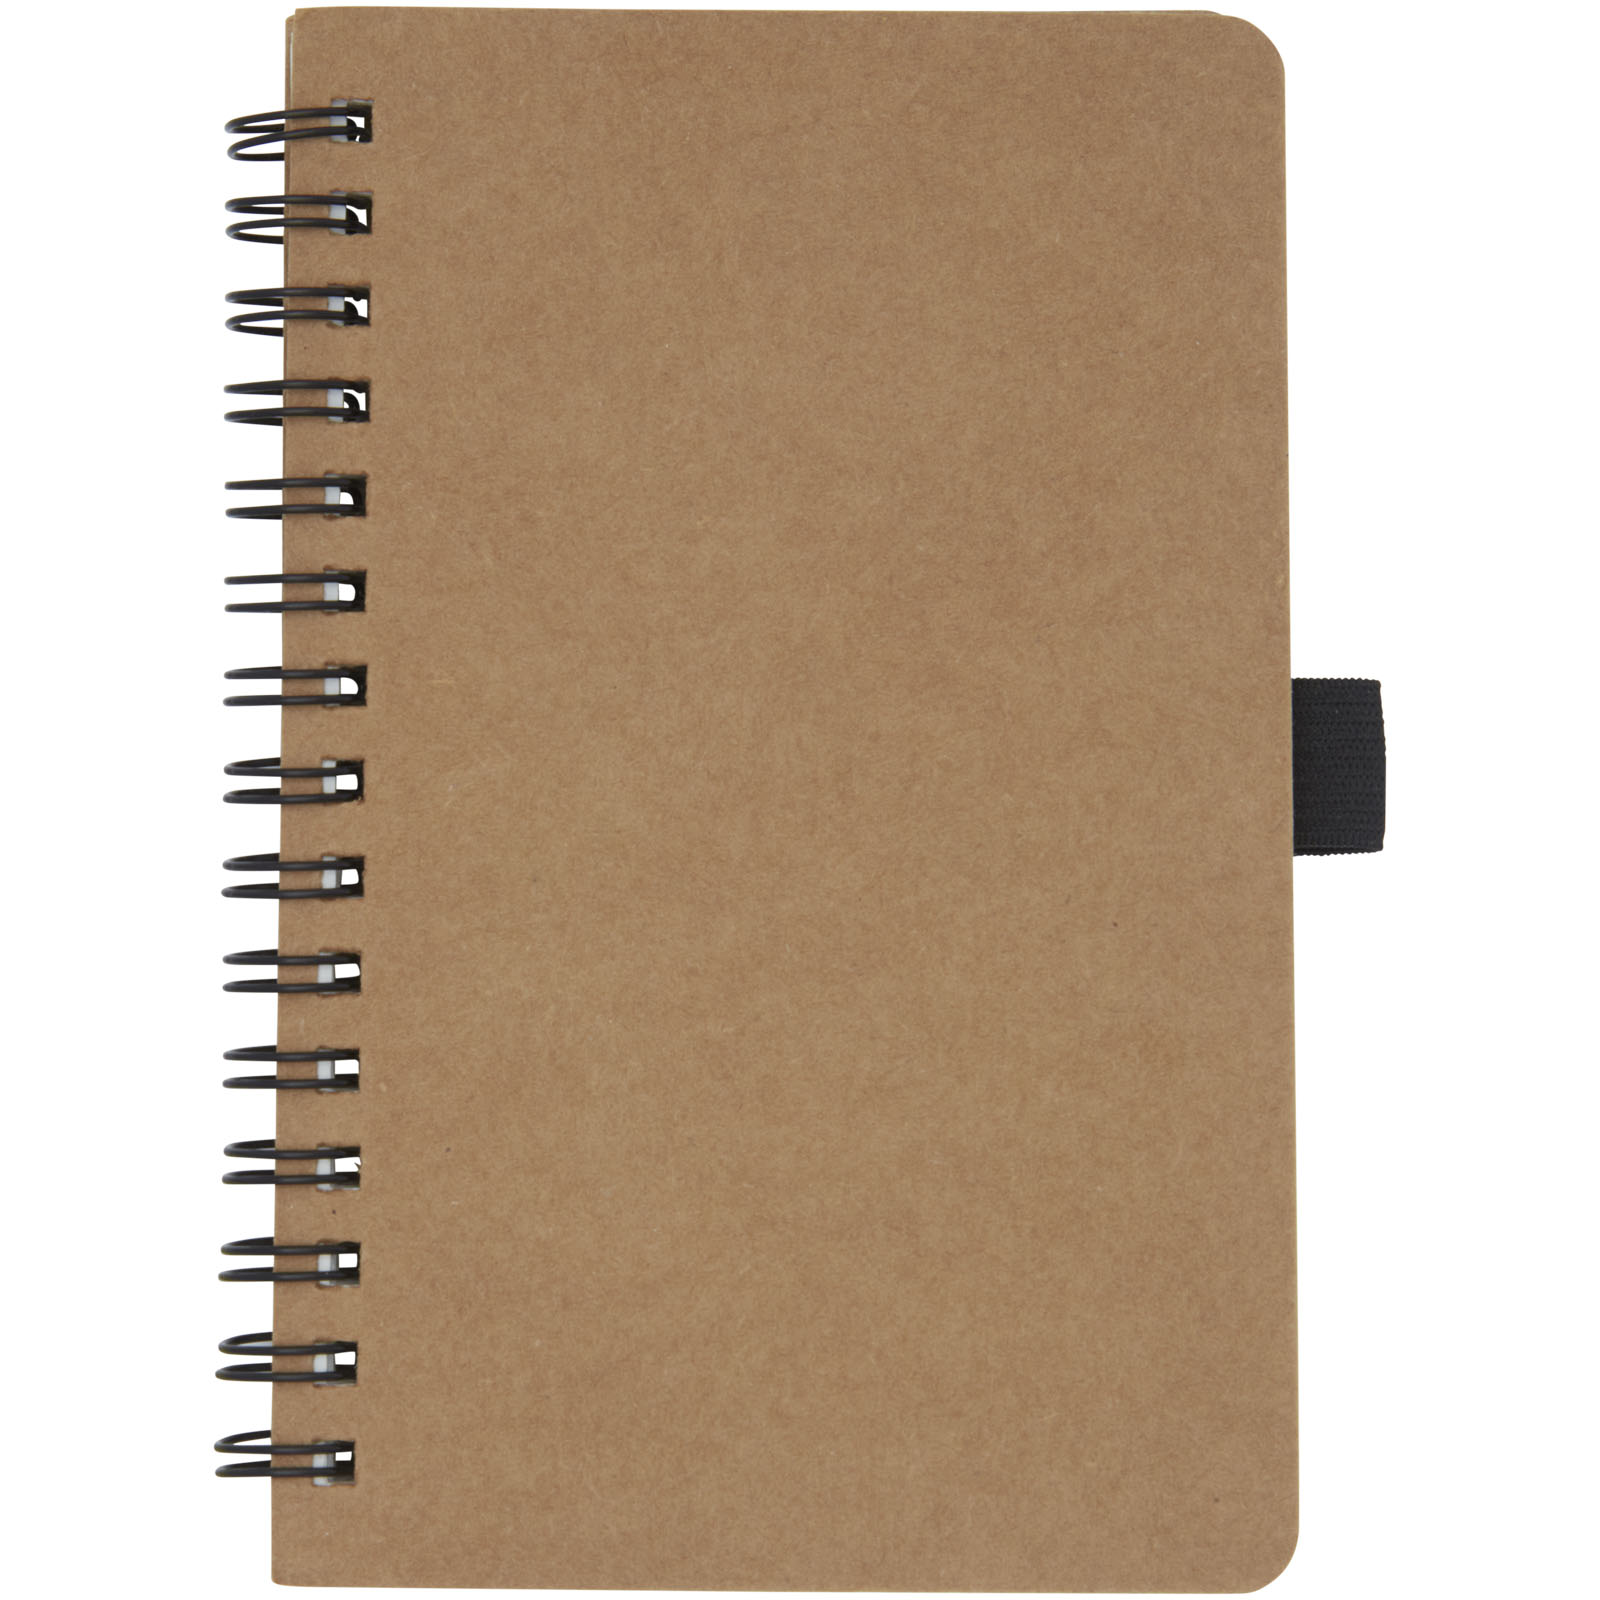 Advertising Notebooks - Cobble A6 wire-o recycled cardboard notebook with stone paper - 1